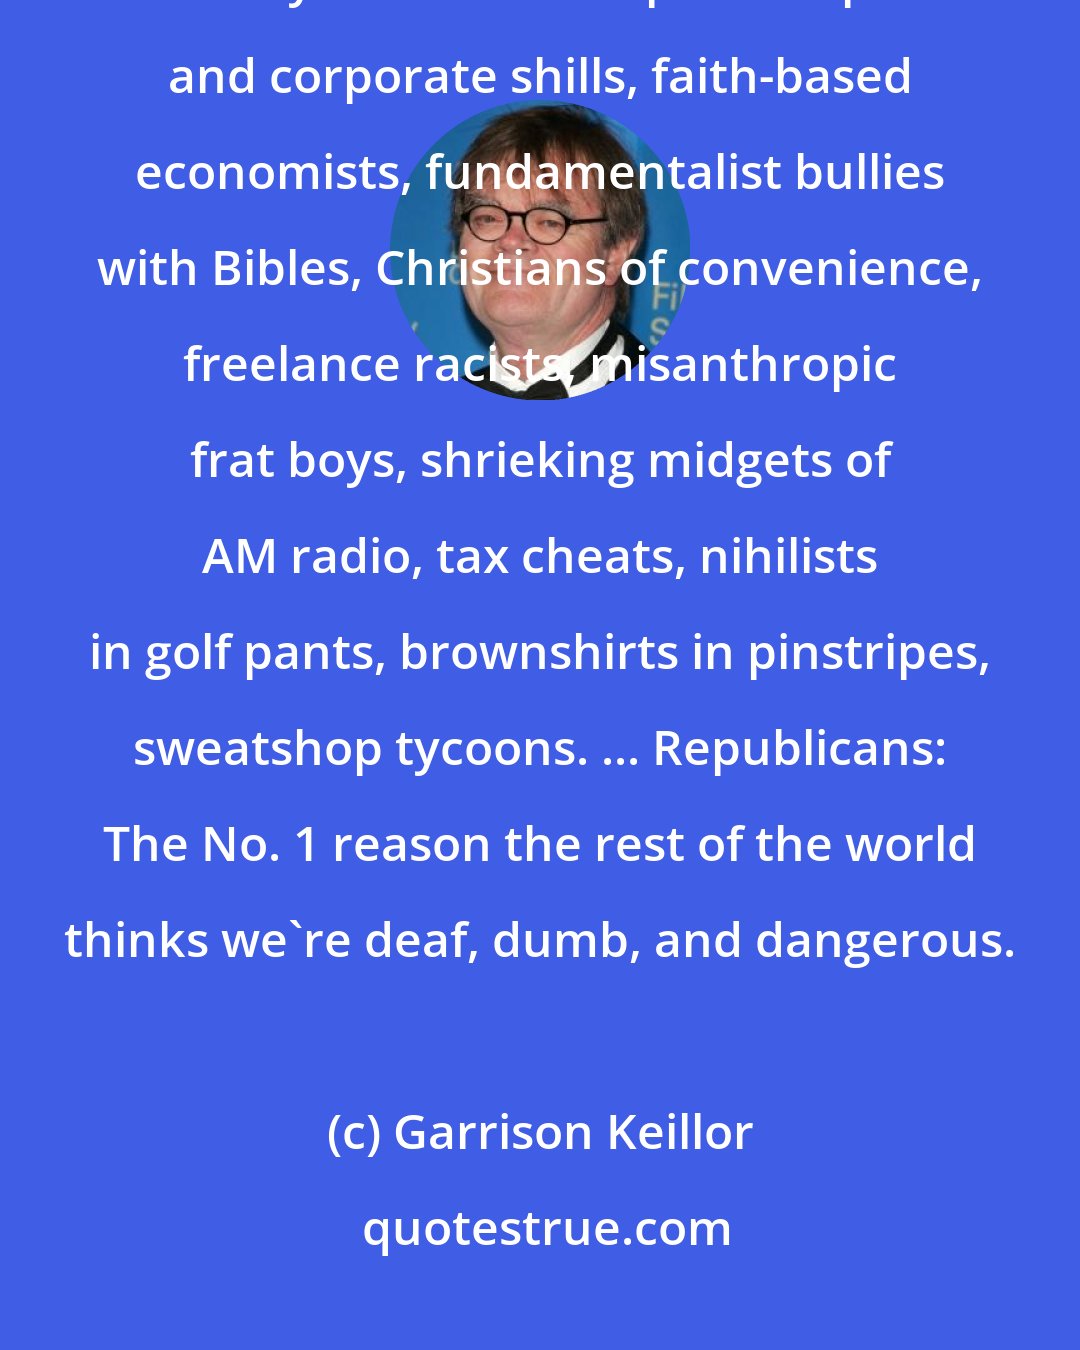 Garrison Keillor: The party of Lincoln and Liberty was transmogrified into the party of hairy-backed swamp developers and corporate shills, faith-based economists, fundamentalist bullies with Bibles, Christians of convenience, freelance racists, misanthropic frat boys, shrieking midgets of AM radio, tax cheats, nihilists in golf pants, brownshirts in pinstripes, sweatshop tycoons. ... Republicans: The No. 1 reason the rest of the world thinks we're deaf, dumb, and dangerous.